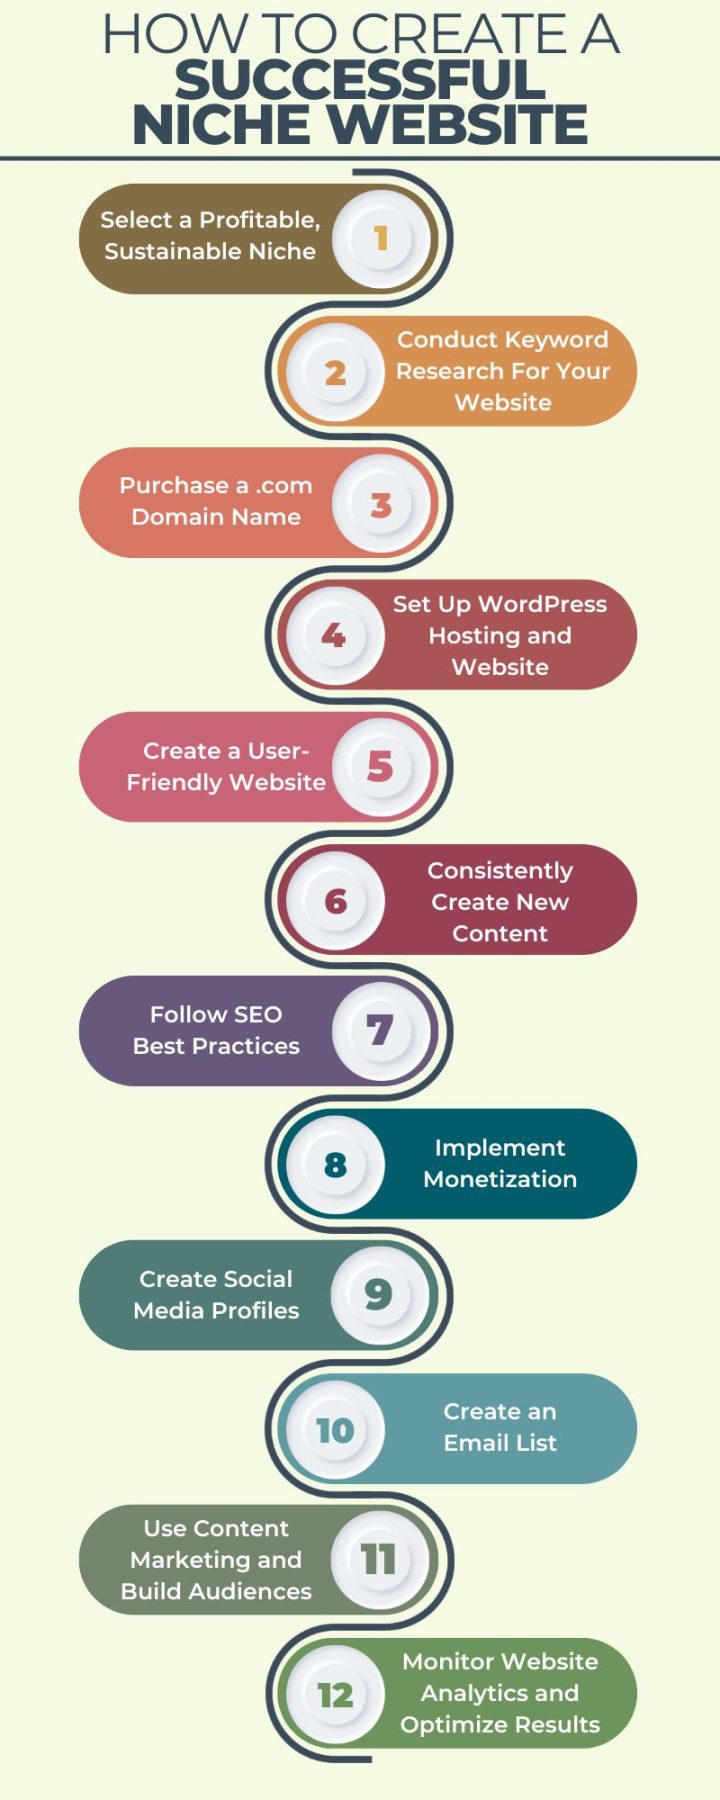 how to create a niche website in 12 steps infographic